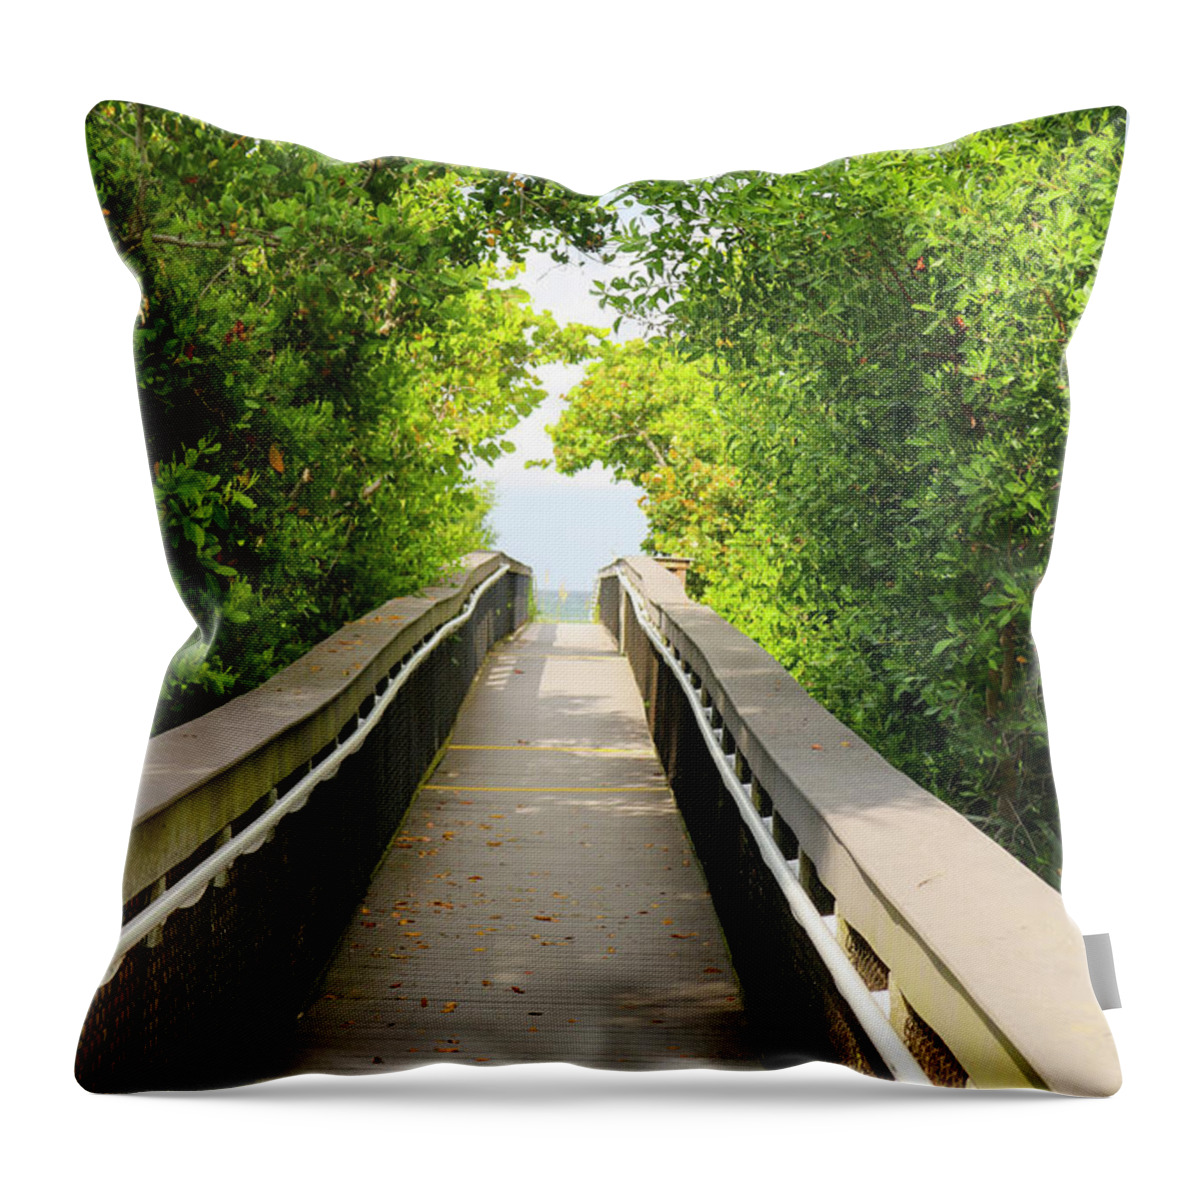 Florida Throw Pillow featuring the photograph This Way to Paradise by Robert Wilder Jr